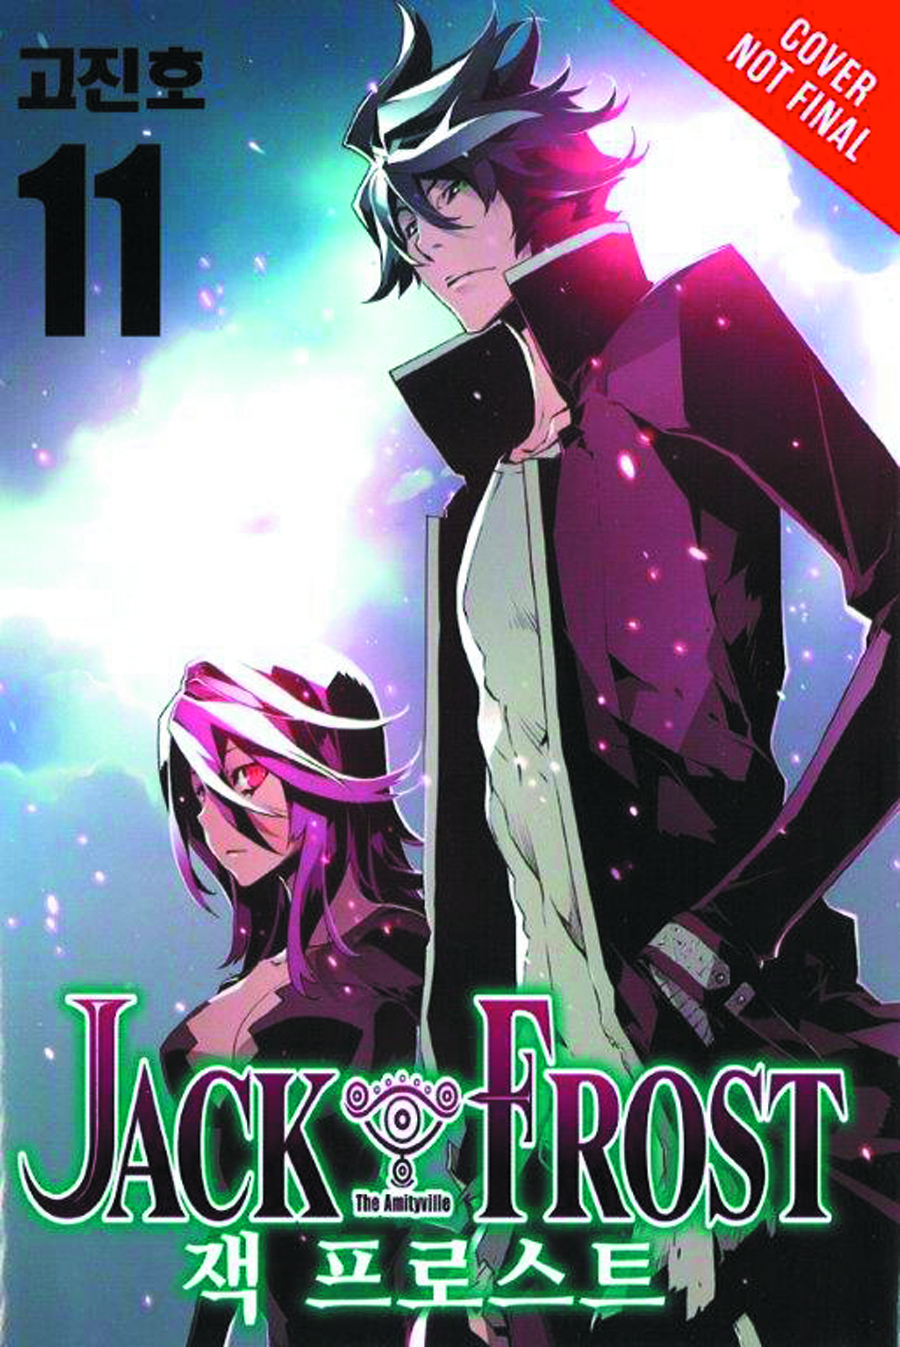 JACK FROST TP VOL 11 (OF 11)